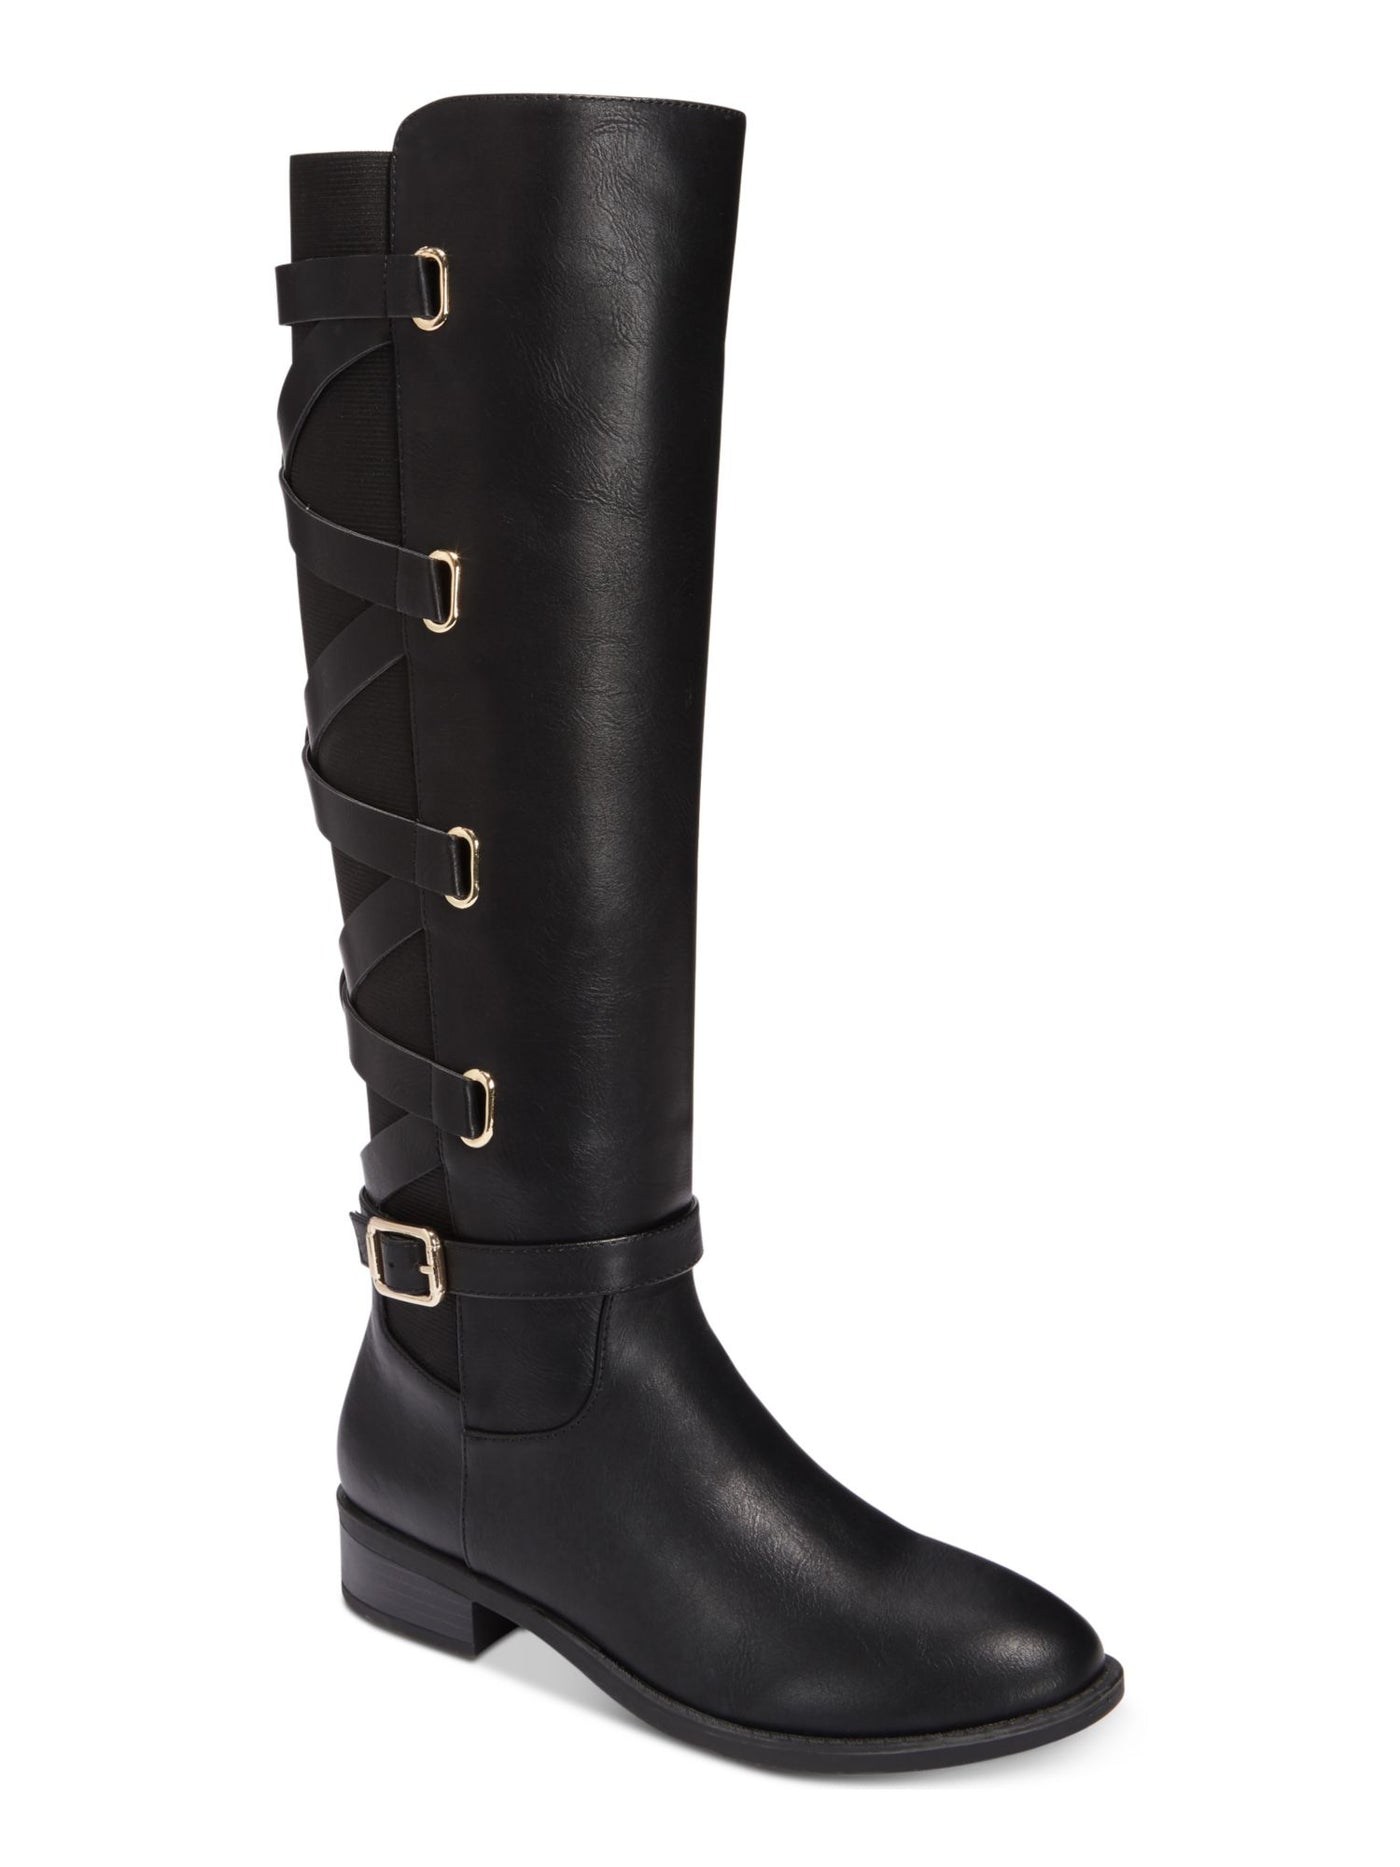 THALIA SODI Womens Black Criss-Cross Straps At Back Buckle Accent Stretch Round Toe Stacked Heel Zip-Up Boots Shoes 6.5